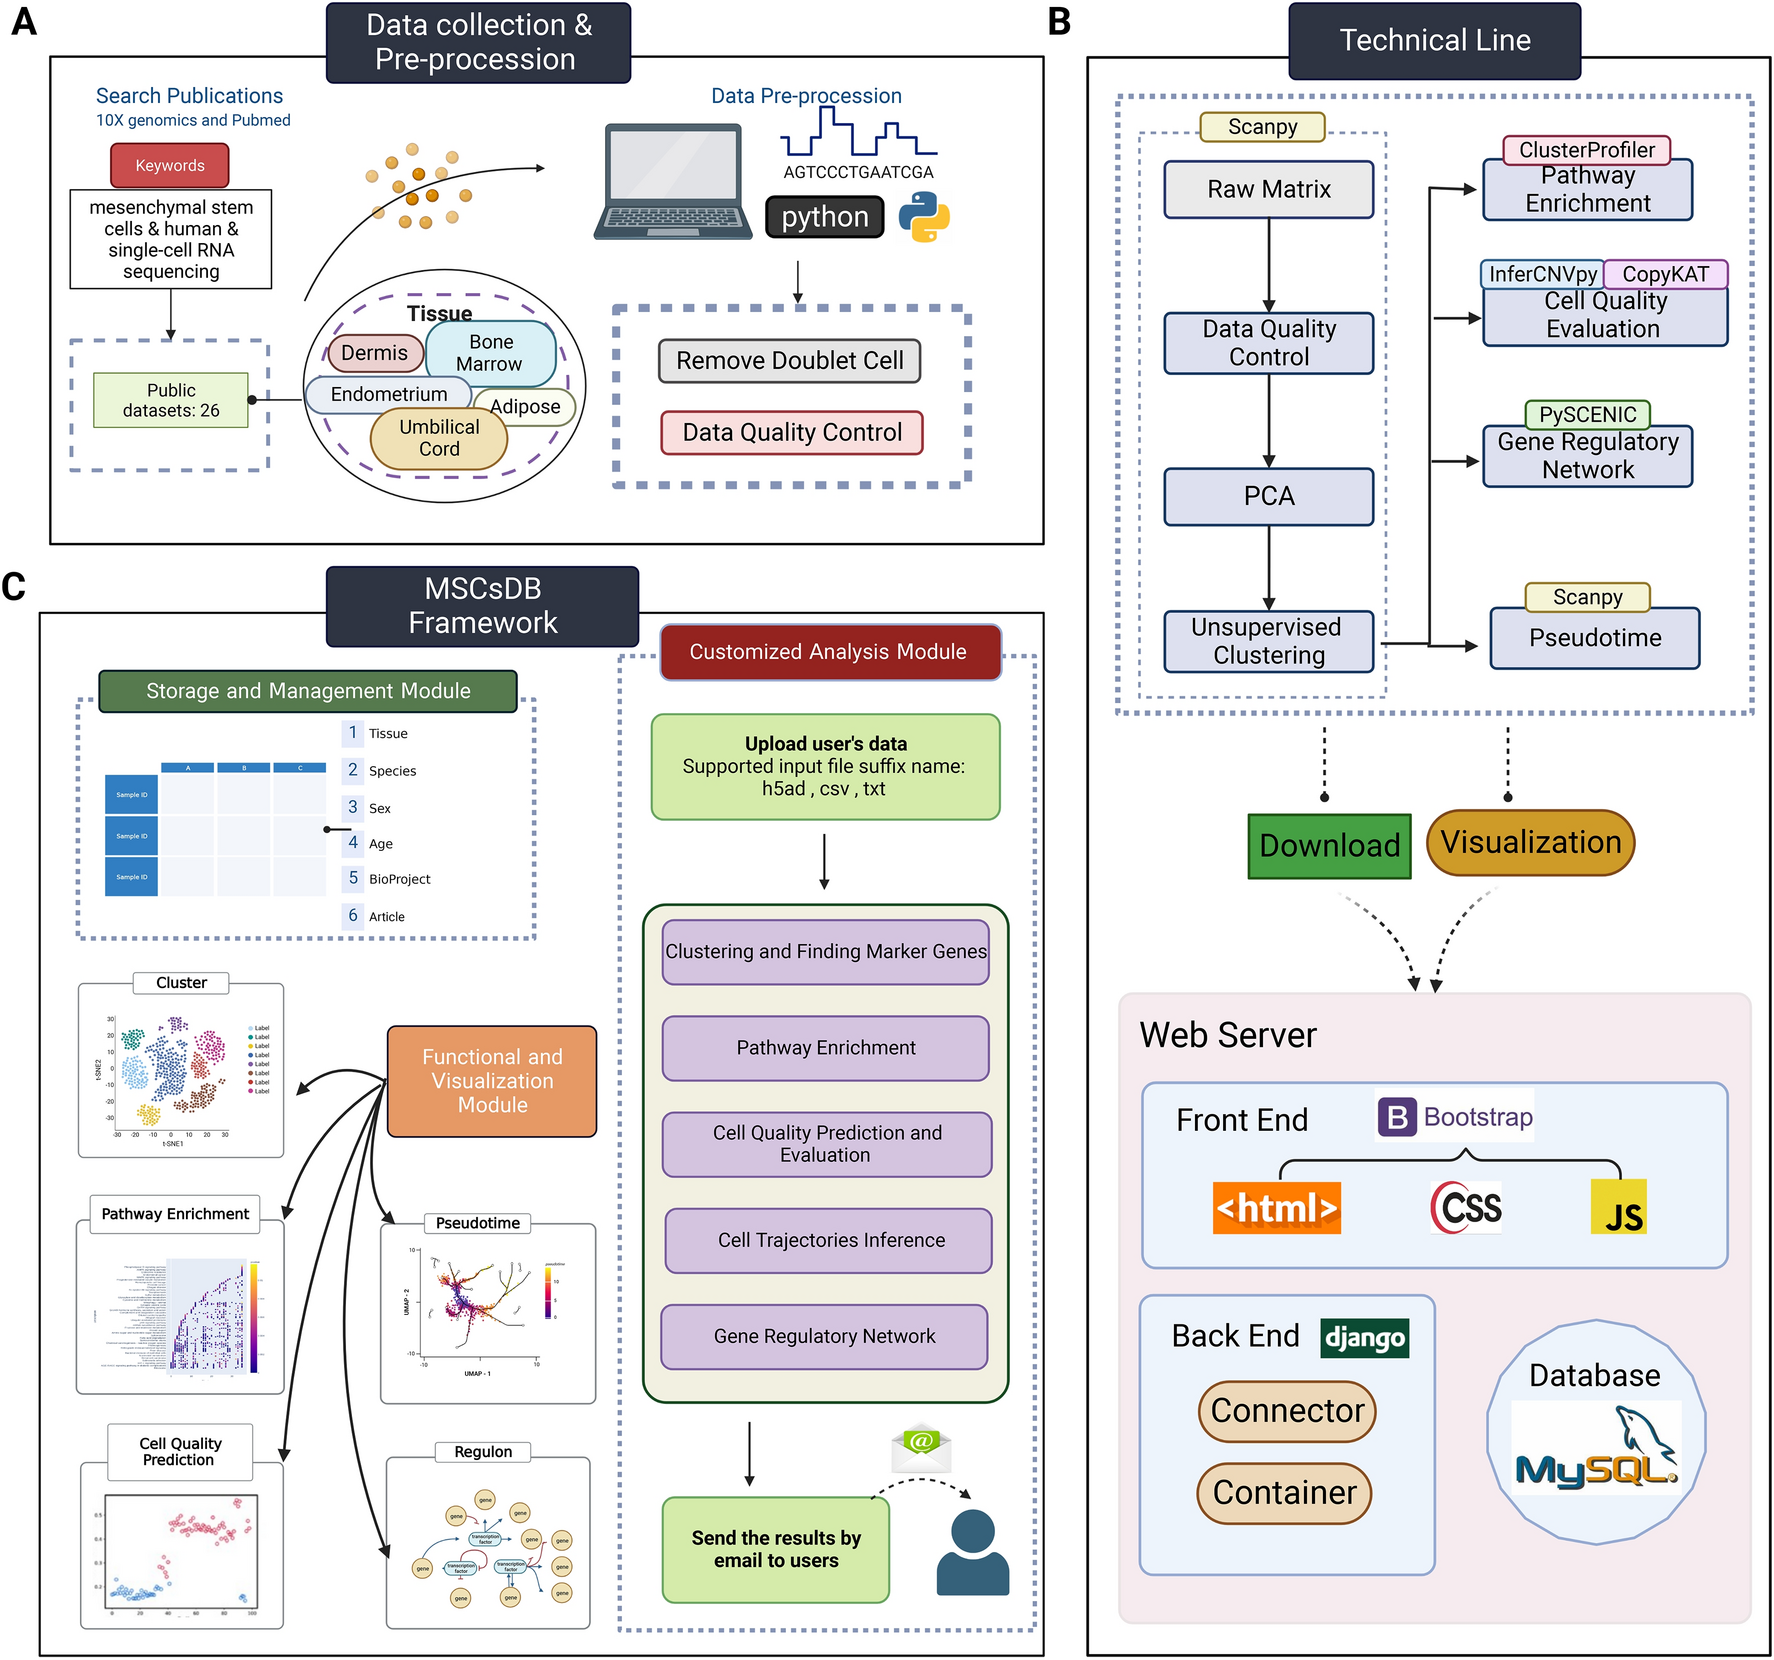 MSCsDB: a database of single-cell transcriptomic profiles and in-depth comprehensive analyses of human mesenchymal stem cells